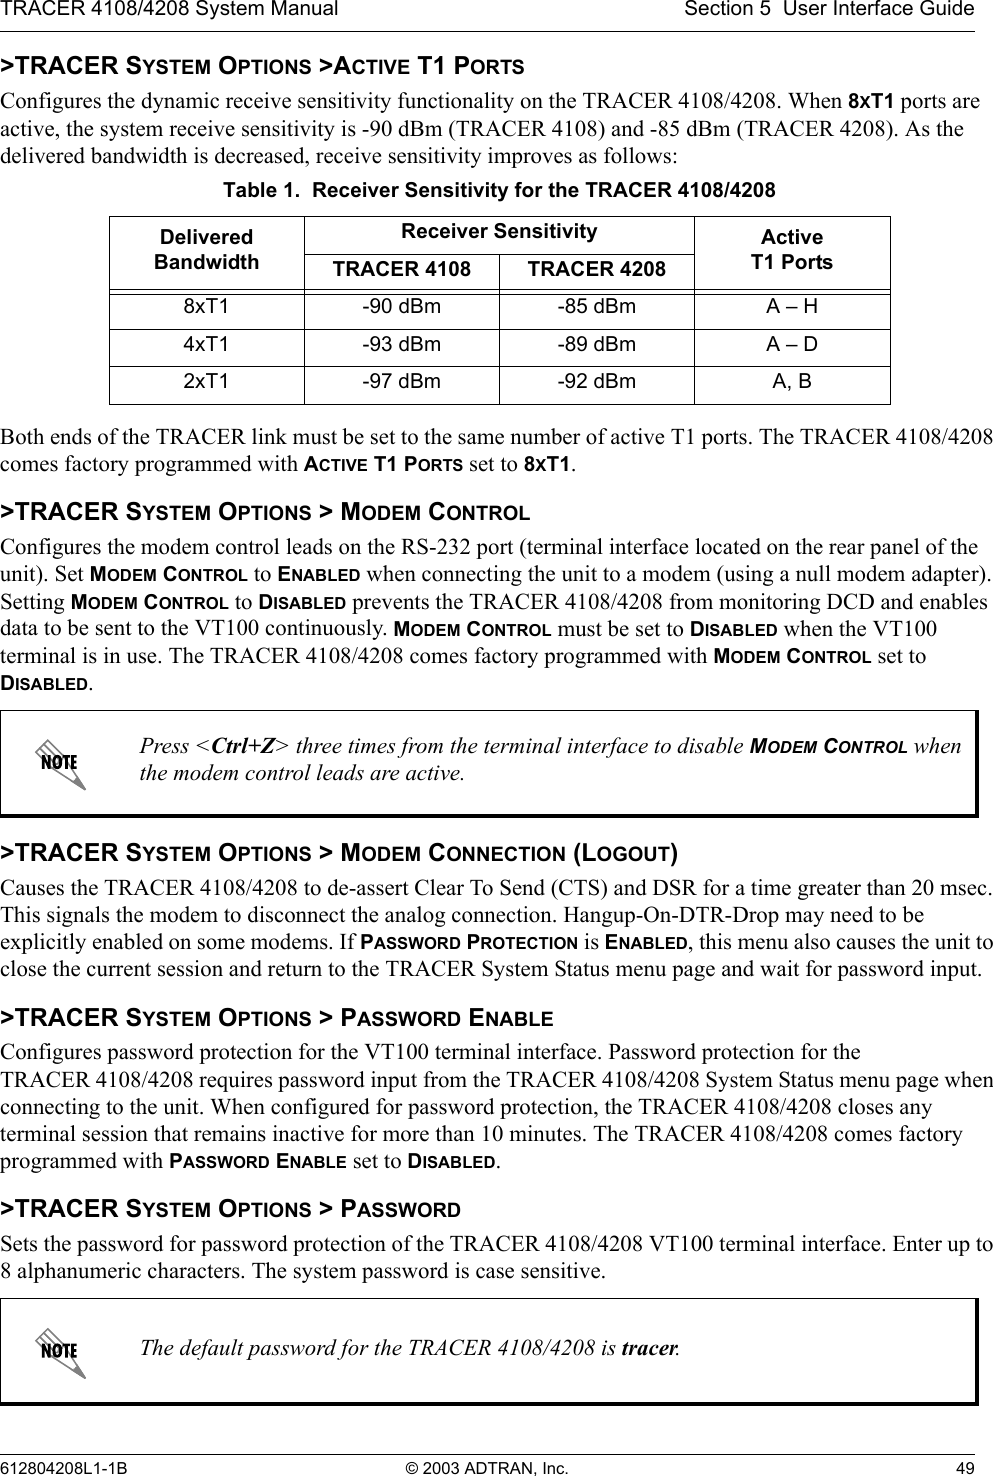 TRACER 4108/4208 System Manual Section 5  User Interface Guide612804208L1-1B © 2003 ADTRAN, Inc. 49&gt;TRACER SYSTEM OPTIONS &gt;ACTIVE T1 PORTSConfigures the dynamic receive sensitivity functionality on the TRACER 4108/4208. When 8XT1 ports are active, the system receive sensitivity is -90 dBm (TRACER 4108) and -85 dBm (TRACER 4208). As the delivered bandwidth is decreased, receive sensitivity improves as follows:Both ends of the TRACER link must be set to the same number of active T1 ports. The TRACER 4108/4208 comes factory programmed with ACTIVE T1 PORTS set to 8XT1.&gt;TRACER SYSTEM OPTIONS &gt; MODEM CONTROLConfigures the modem control leads on the RS-232 port (terminal interface located on the rear panel of the unit). Set MODEM CONTROL to ENABLED when connecting the unit to a modem (using a null modem adapter). Setting MODEM CONTROL to DISABLED prevents the TRACER 4108/4208 from monitoring DCD and enables data to be sent to the VT100 continuously. MODEM CONTROL must be set to DISABLED when the VT100 terminal is in use. The TRACER 4108/4208 comes factory programmed with MODEM CONTROL set to DISABLED.&gt;TRACER SYSTEM OPTIONS &gt; MODEM CONNECTION (LOGOUT)Causes the TRACER 4108/4208 to de-assert Clear To Send (CTS) and DSR for a time greater than 20 msec. This signals the modem to disconnect the analog connection. Hangup-On-DTR-Drop may need to be explicitly enabled on some modems. If PASSWORD PROTECTION is ENABLED, this menu also causes the unit to close the current session and return to the TRACER System Status menu page and wait for password input.&gt;TRACER SYSTEM OPTIONS &gt; PASSWORD ENABLEConfigures password protection for the VT100 terminal interface. Password protection for the TRACER 4108/4208 requires password input from the TRACER 4108/4208 System Status menu page when connecting to the unit. When configured for password protection, the TRACER 4108/4208 closes any terminal session that remains inactive for more than 10 minutes. The TRACER 4108/4208 comes factory programmed with PASSWORD ENABLE set to DISABLED. &gt;TRACER SYSTEM OPTIONS &gt; PASSWORDSets the password for password protection of the TRACER 4108/4208 VT100 terminal interface. Enter up to 8 alphanumeric characters. The system password is case sensitive.Table 1.  Receiver Sensitivity for the TRACER 4108/4208Delivered BandwidthReceiver Sensitivity ActiveT1 PortsTRACER 4108 TRACER 42088xT1 -90 dBm -85 dBm A – H4xT1 -93 dBm -89 dBm A – D2xT1 -97 dBm -92 dBm A, BPress &lt;Ctrl+Z&gt; three times from the terminal interface to disable MODEM CONTROL when the modem control leads are active.The default password for the TRACER 4108/4208 is tracer.